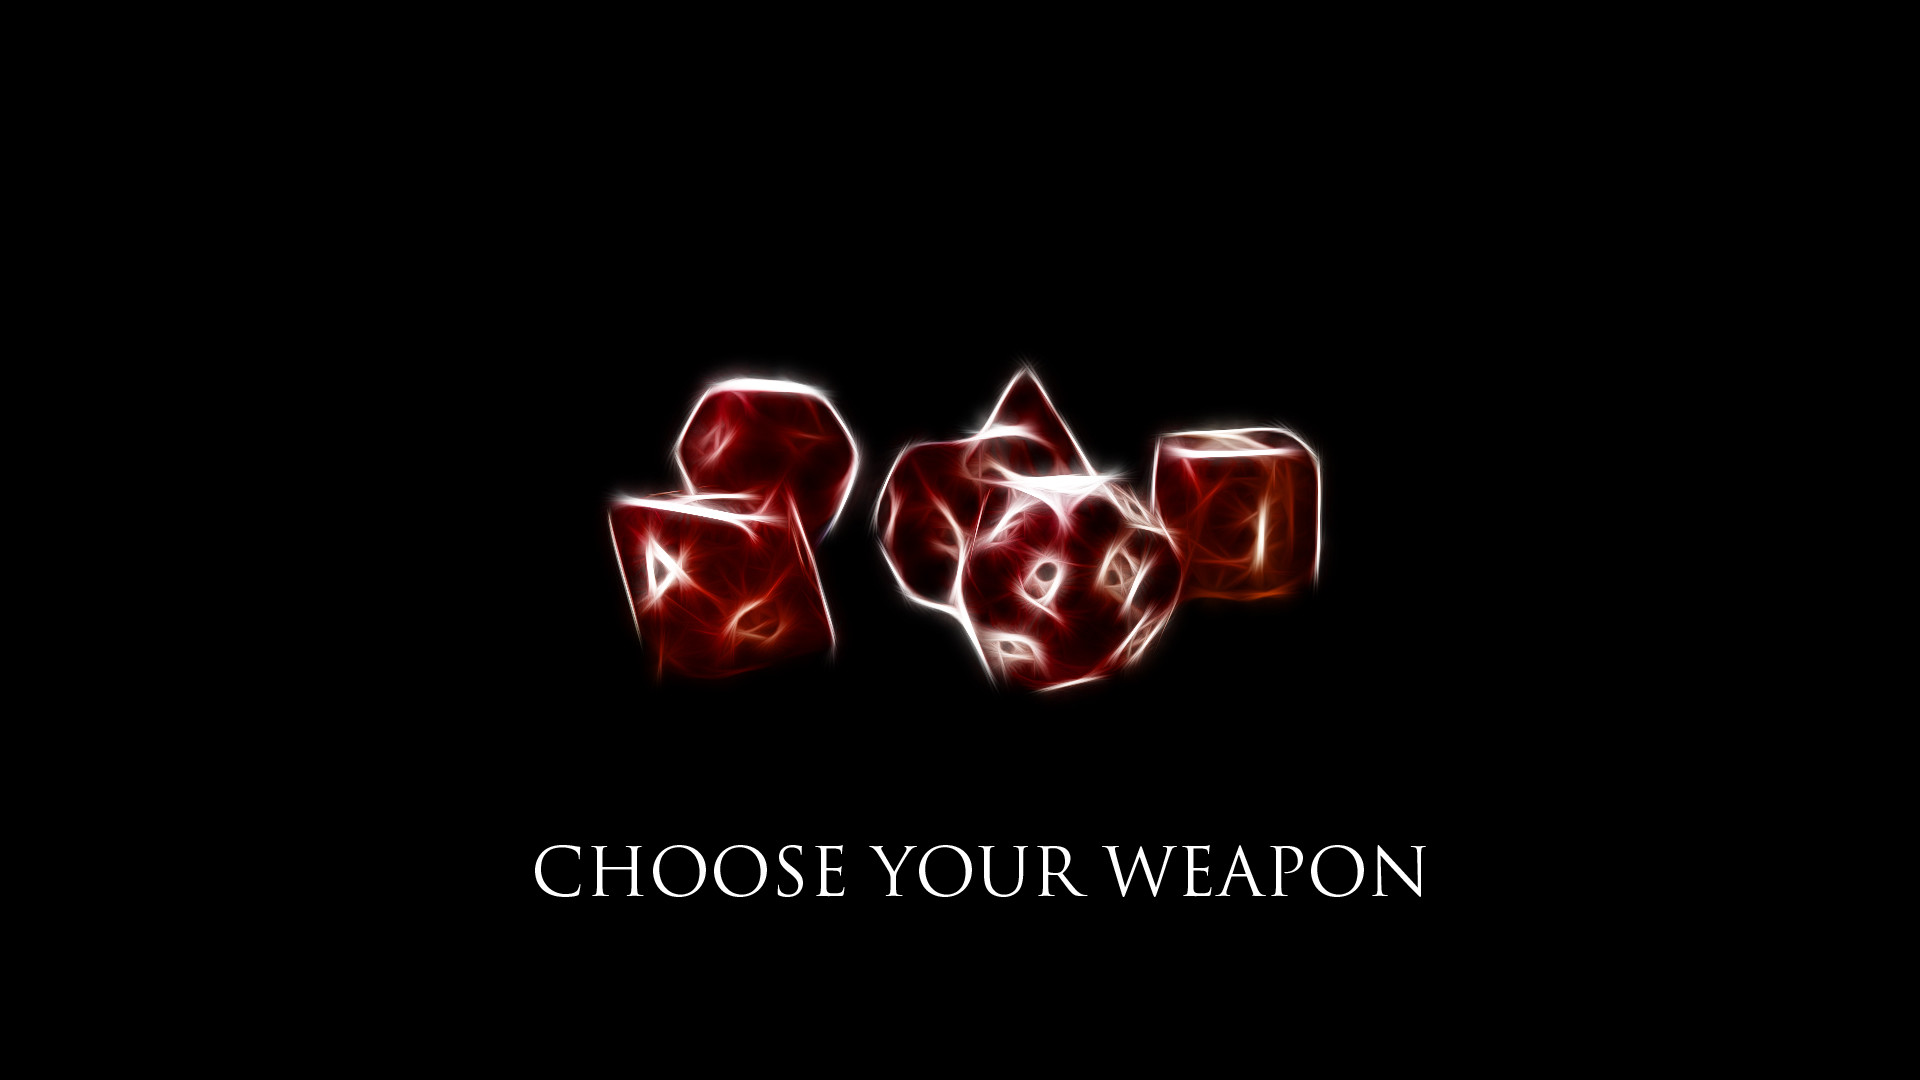 1920x1080 ... Choose Your Weapon  HD Wallpaper by TheRierie